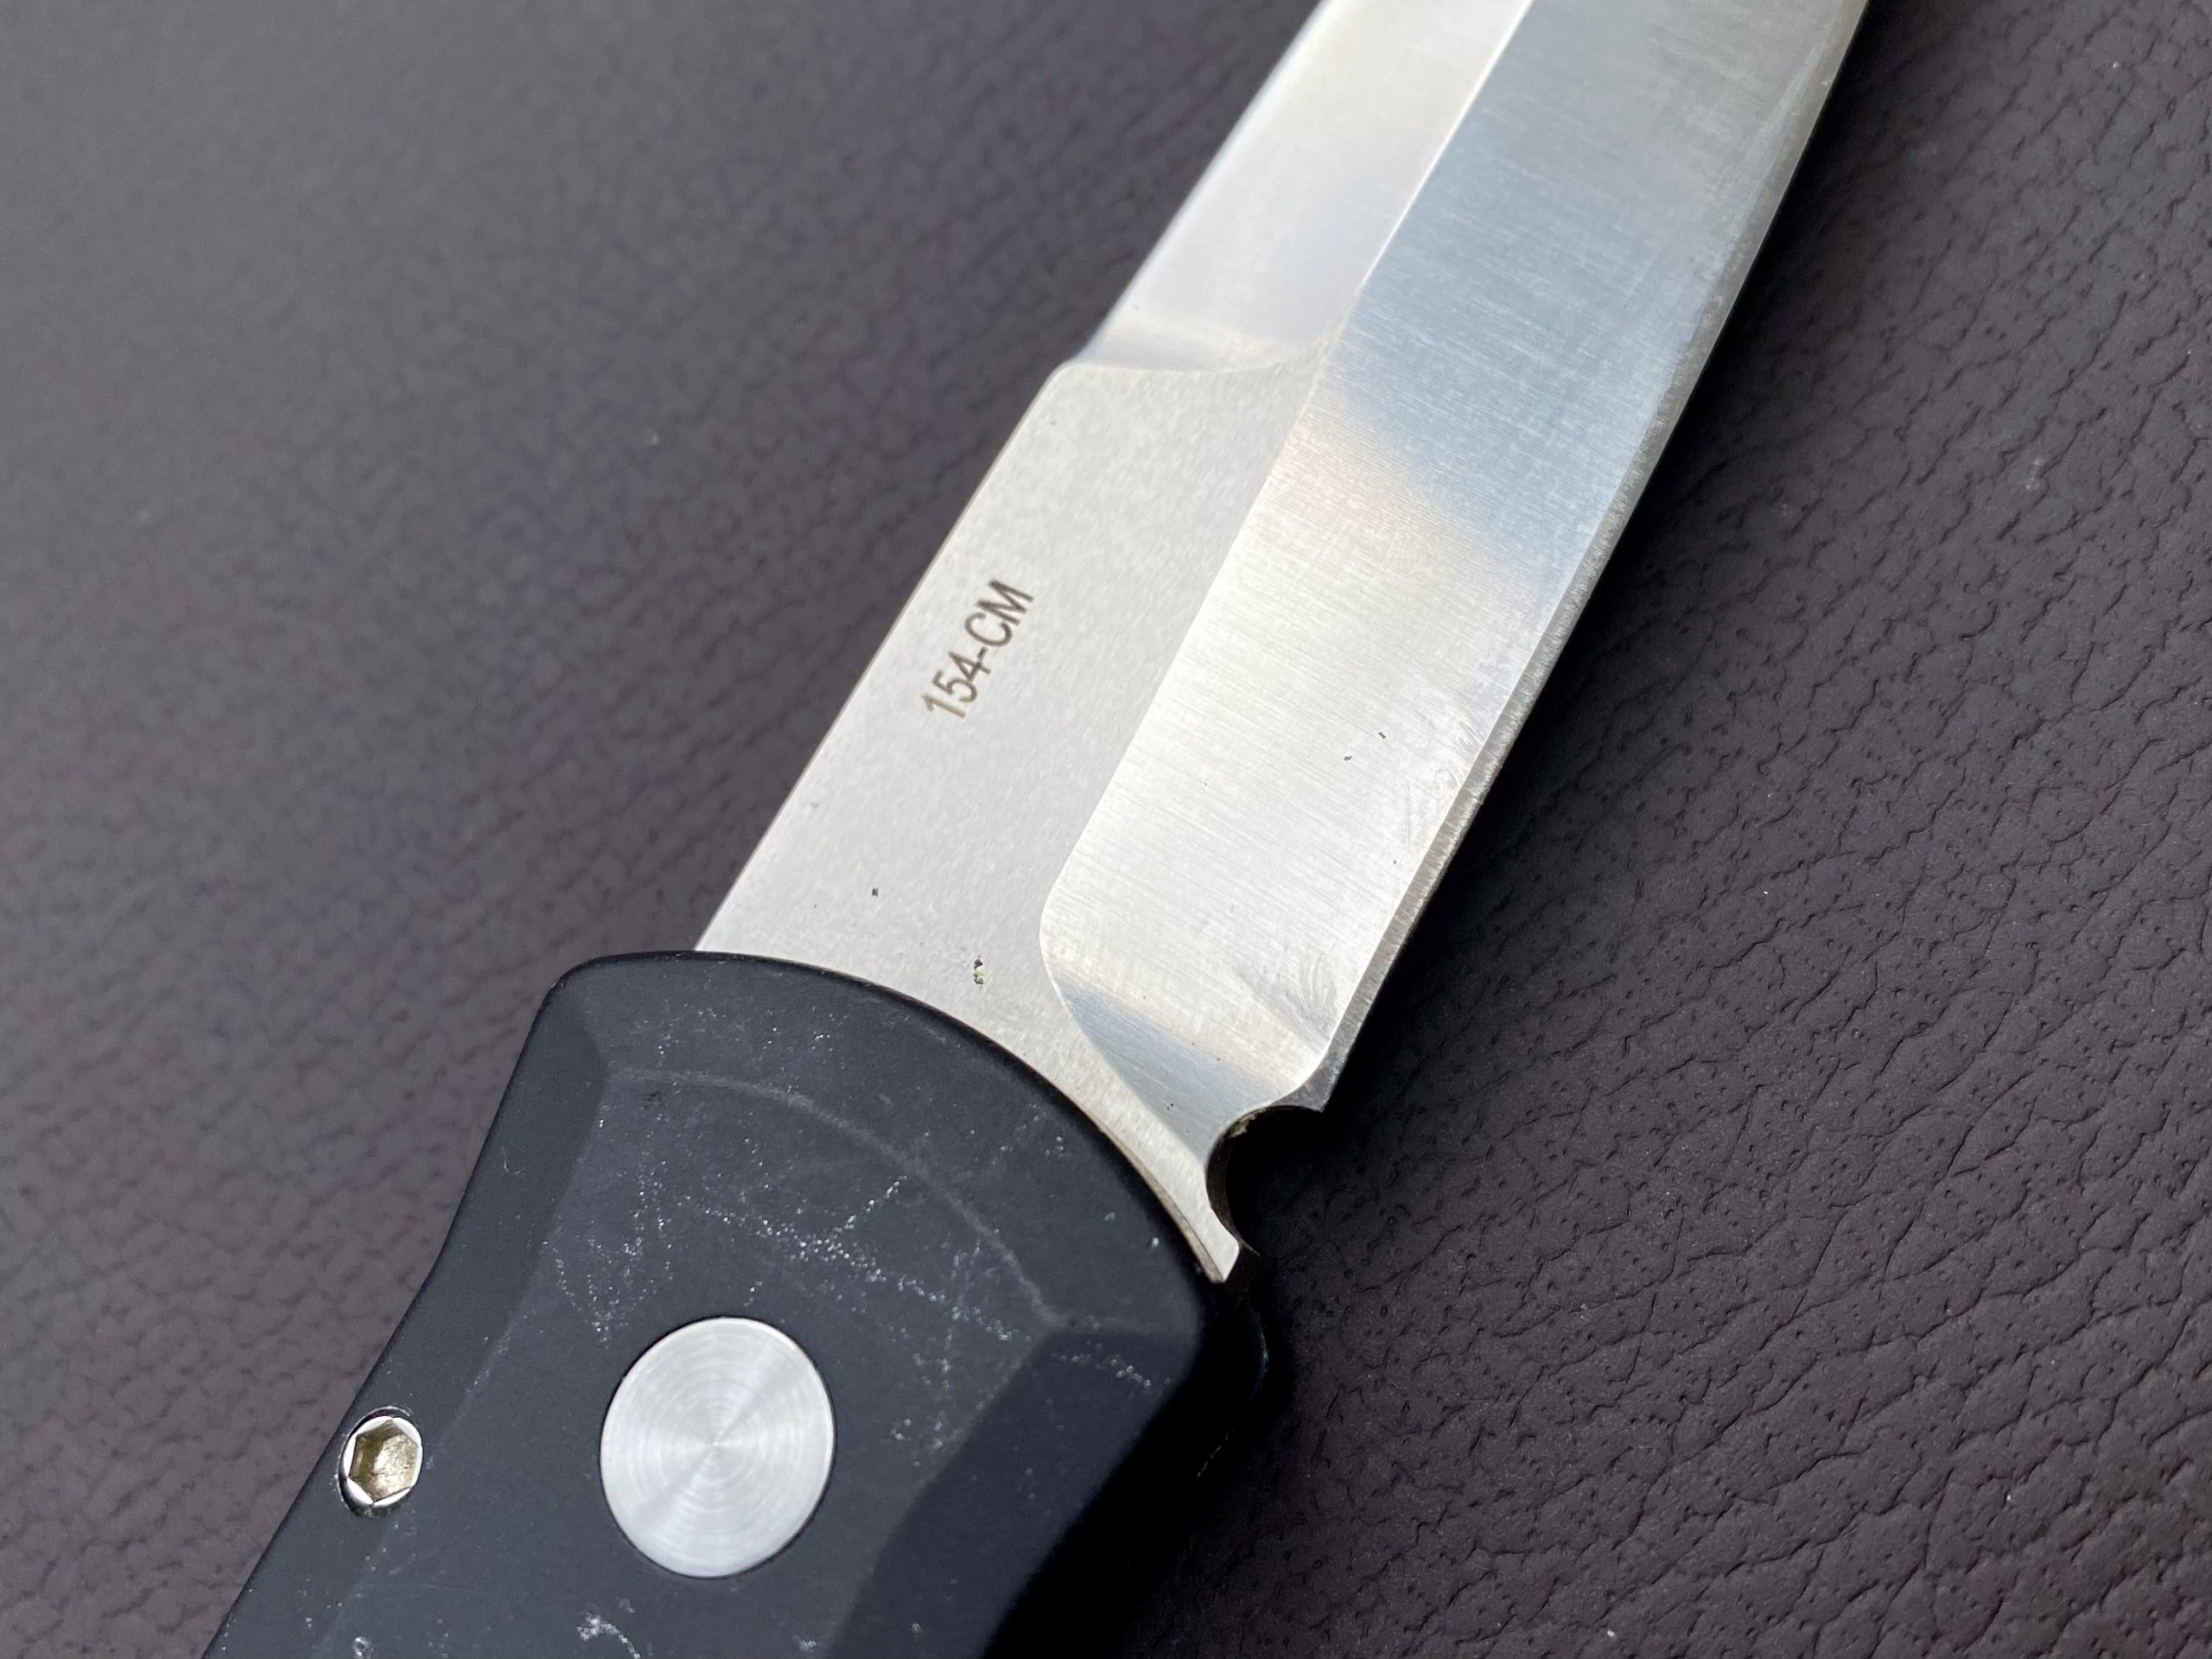 The Godfather is made from 154CM, a high carbon stainless steel. The edge retention is solid, but the blade has kept its shine nicely.